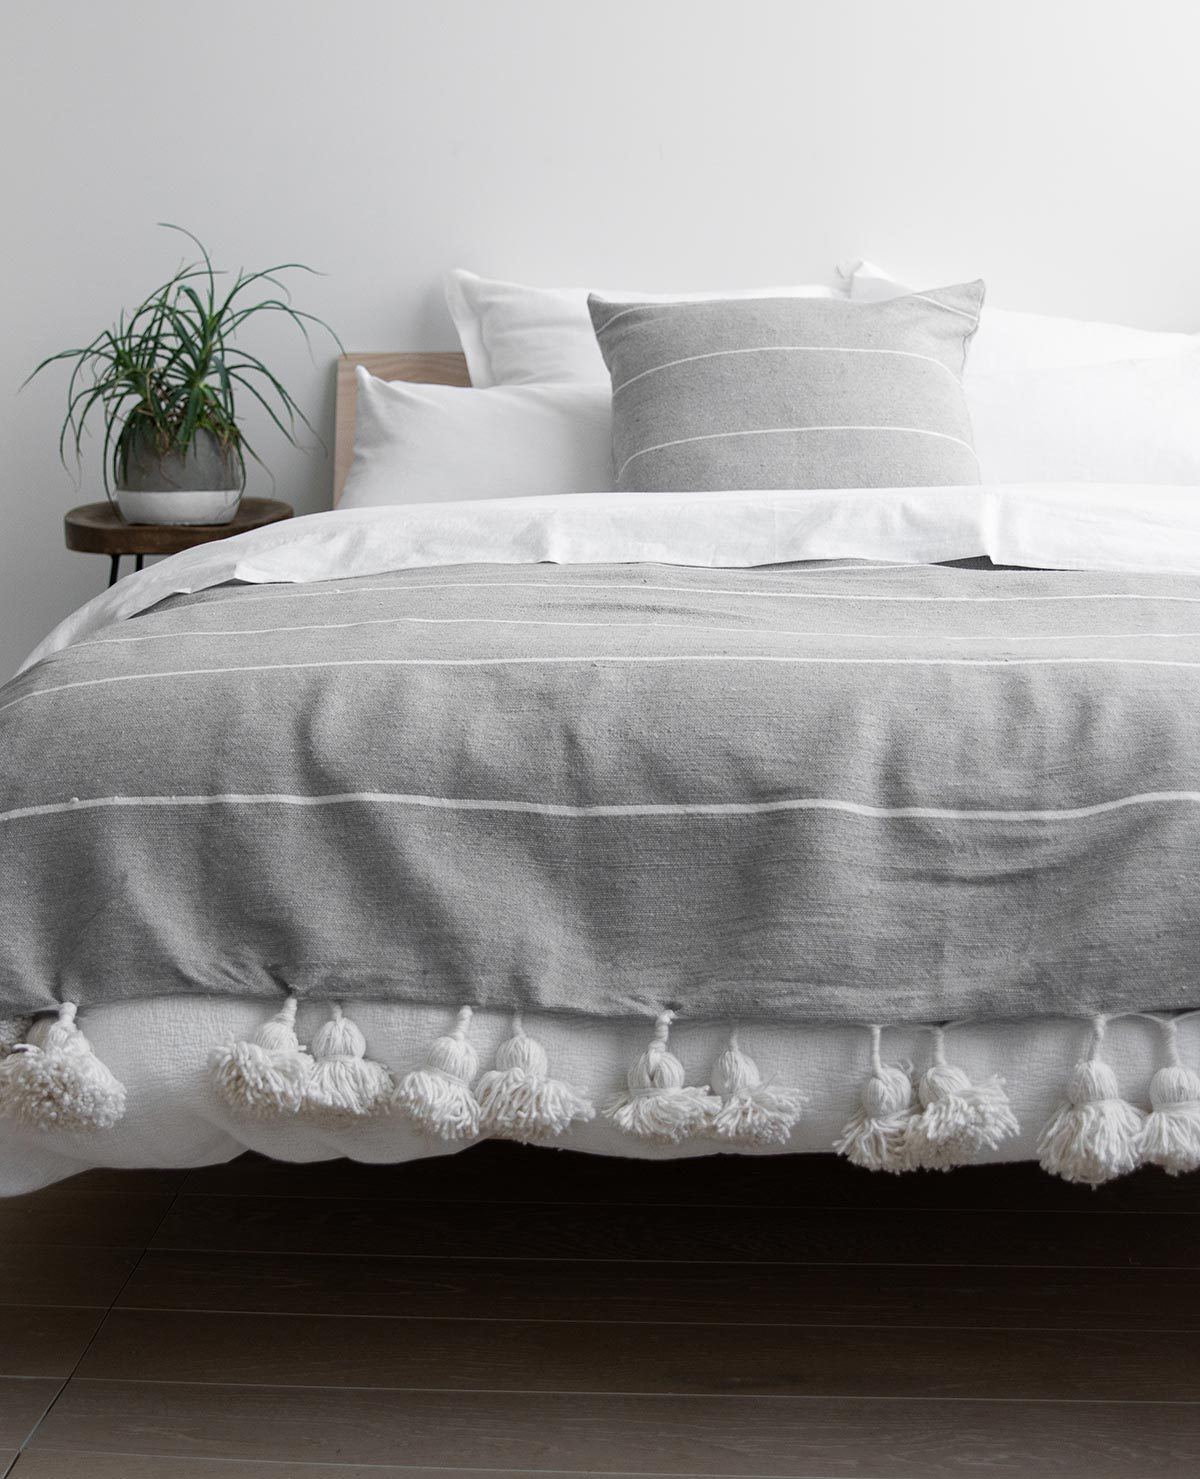 6 Ways to Declutter Your Bedroom (and Keep it Organized For Good)